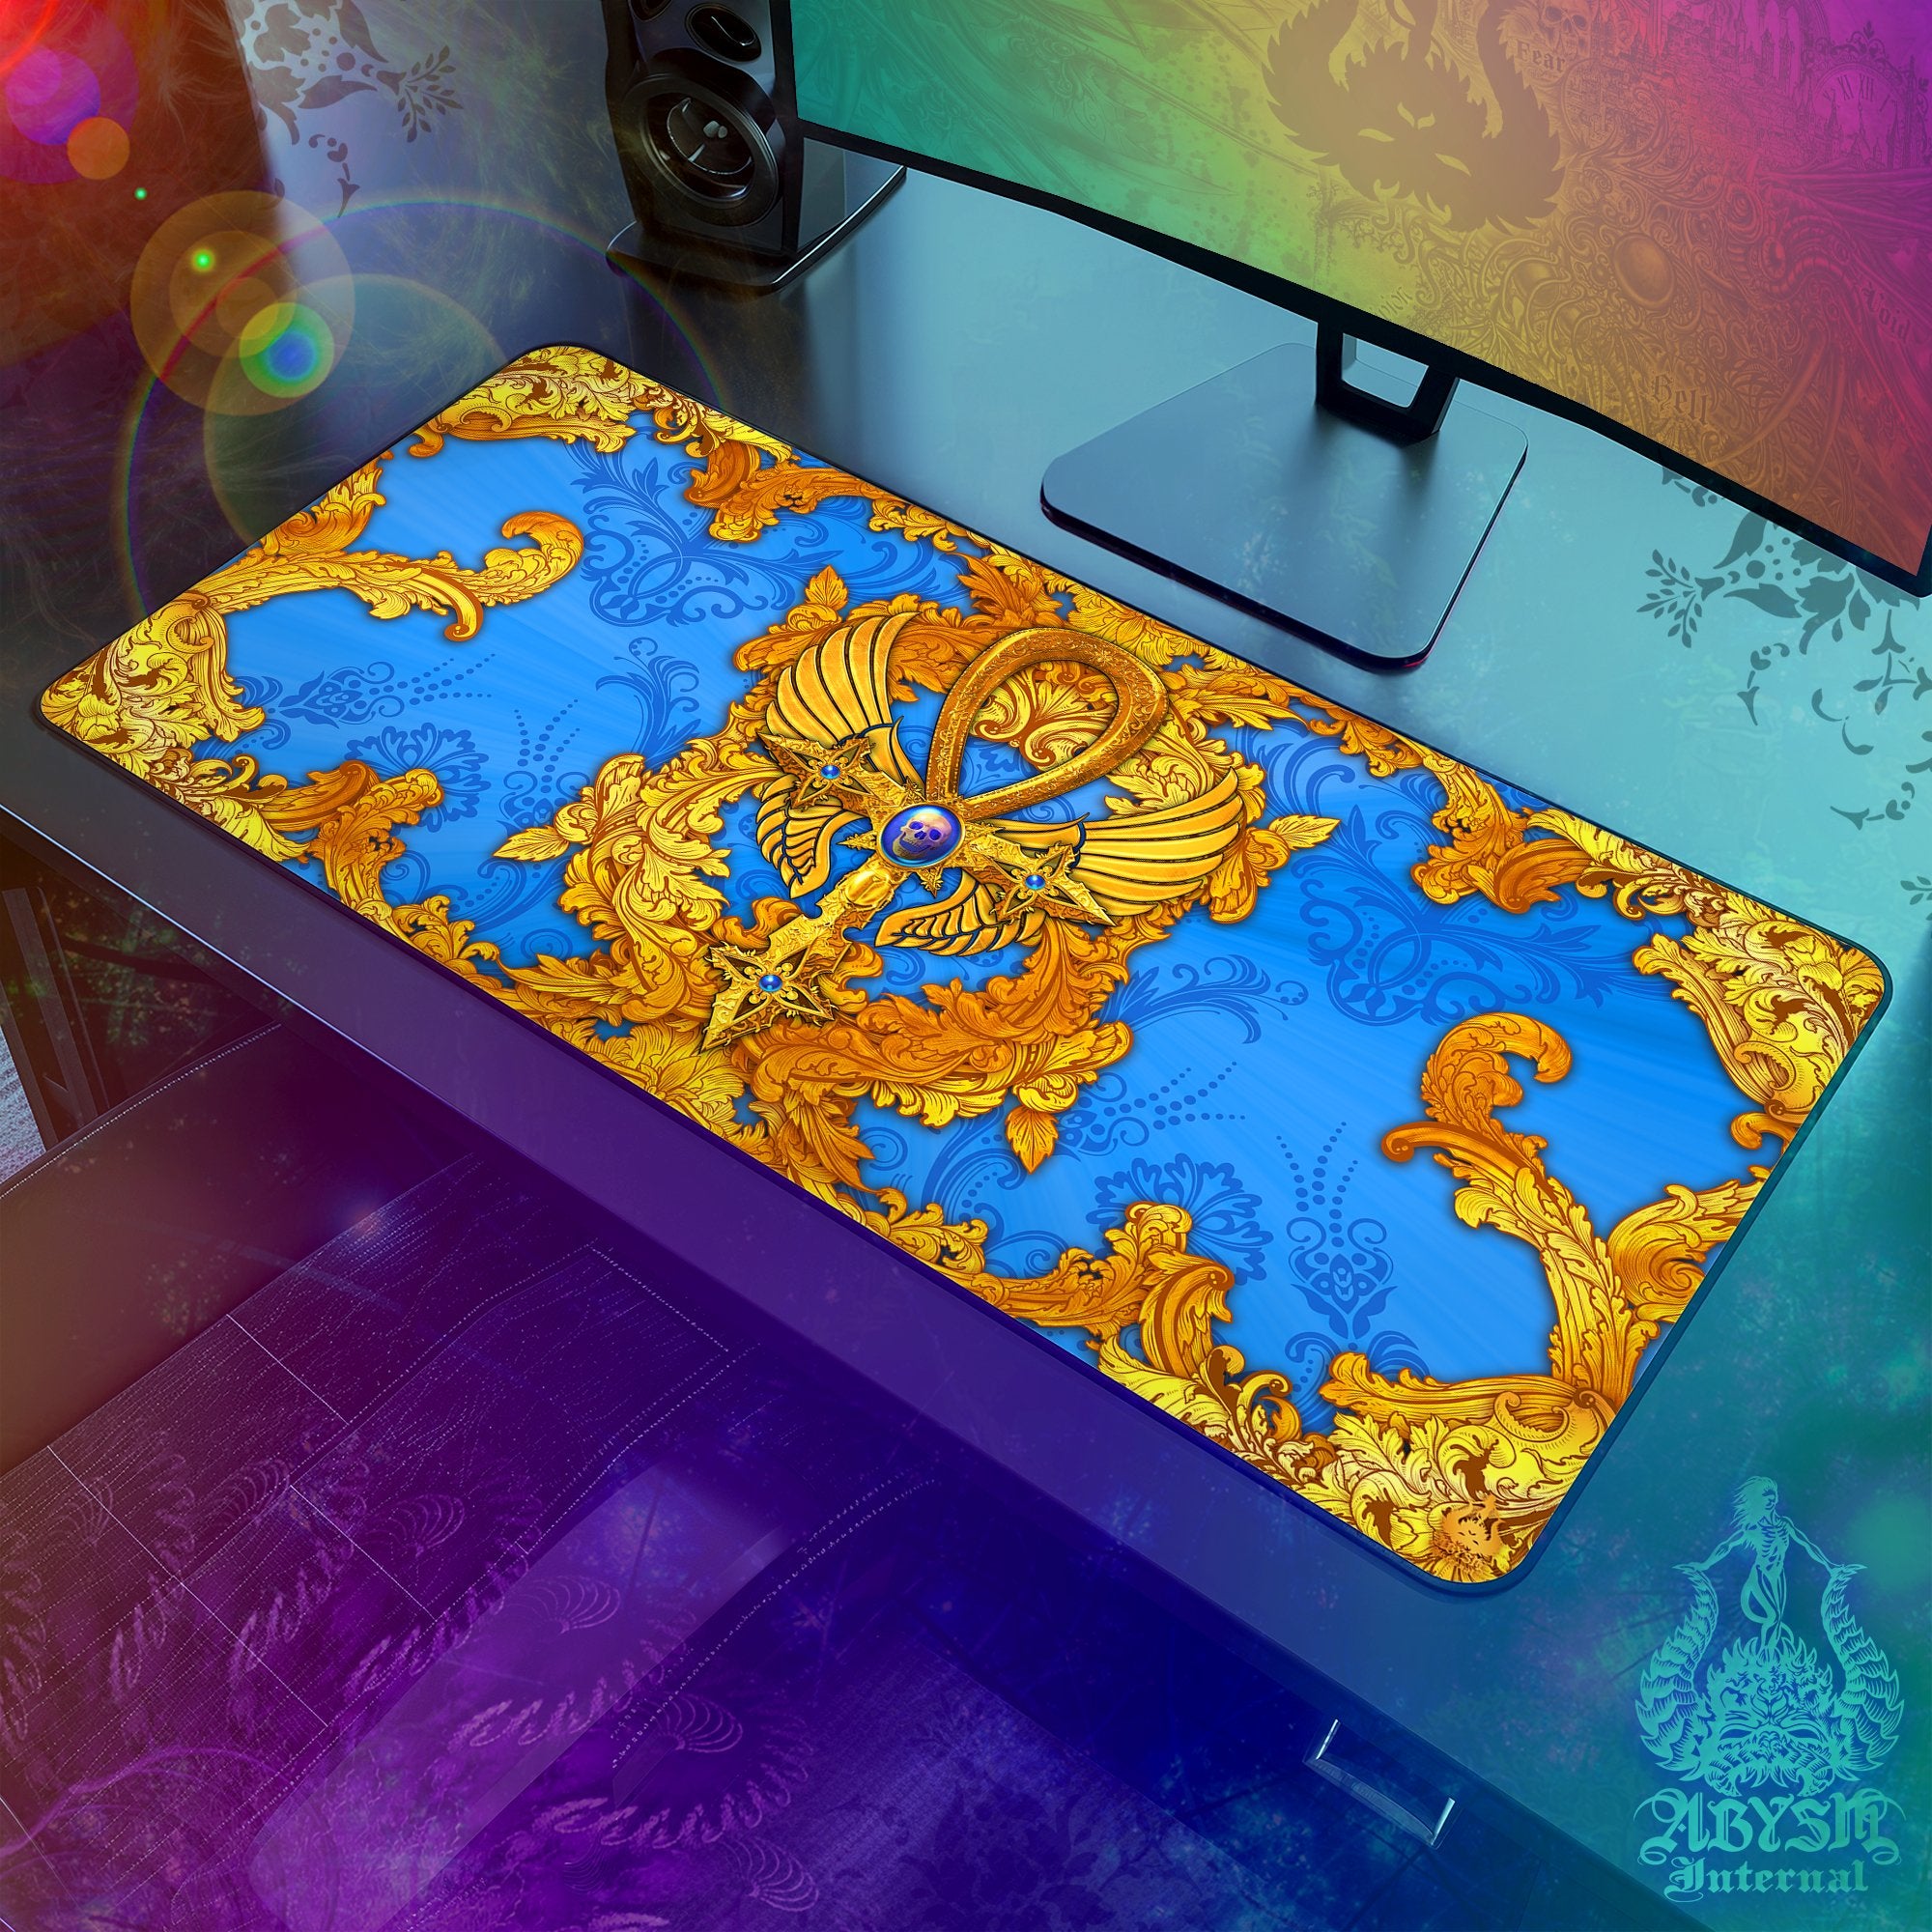 Ankh Mouse Pad, Gold Cross Gaming Desk Mat, Occult Workpad, Cyan Gold Table Protector Cover, Art Print - Abysm Internal